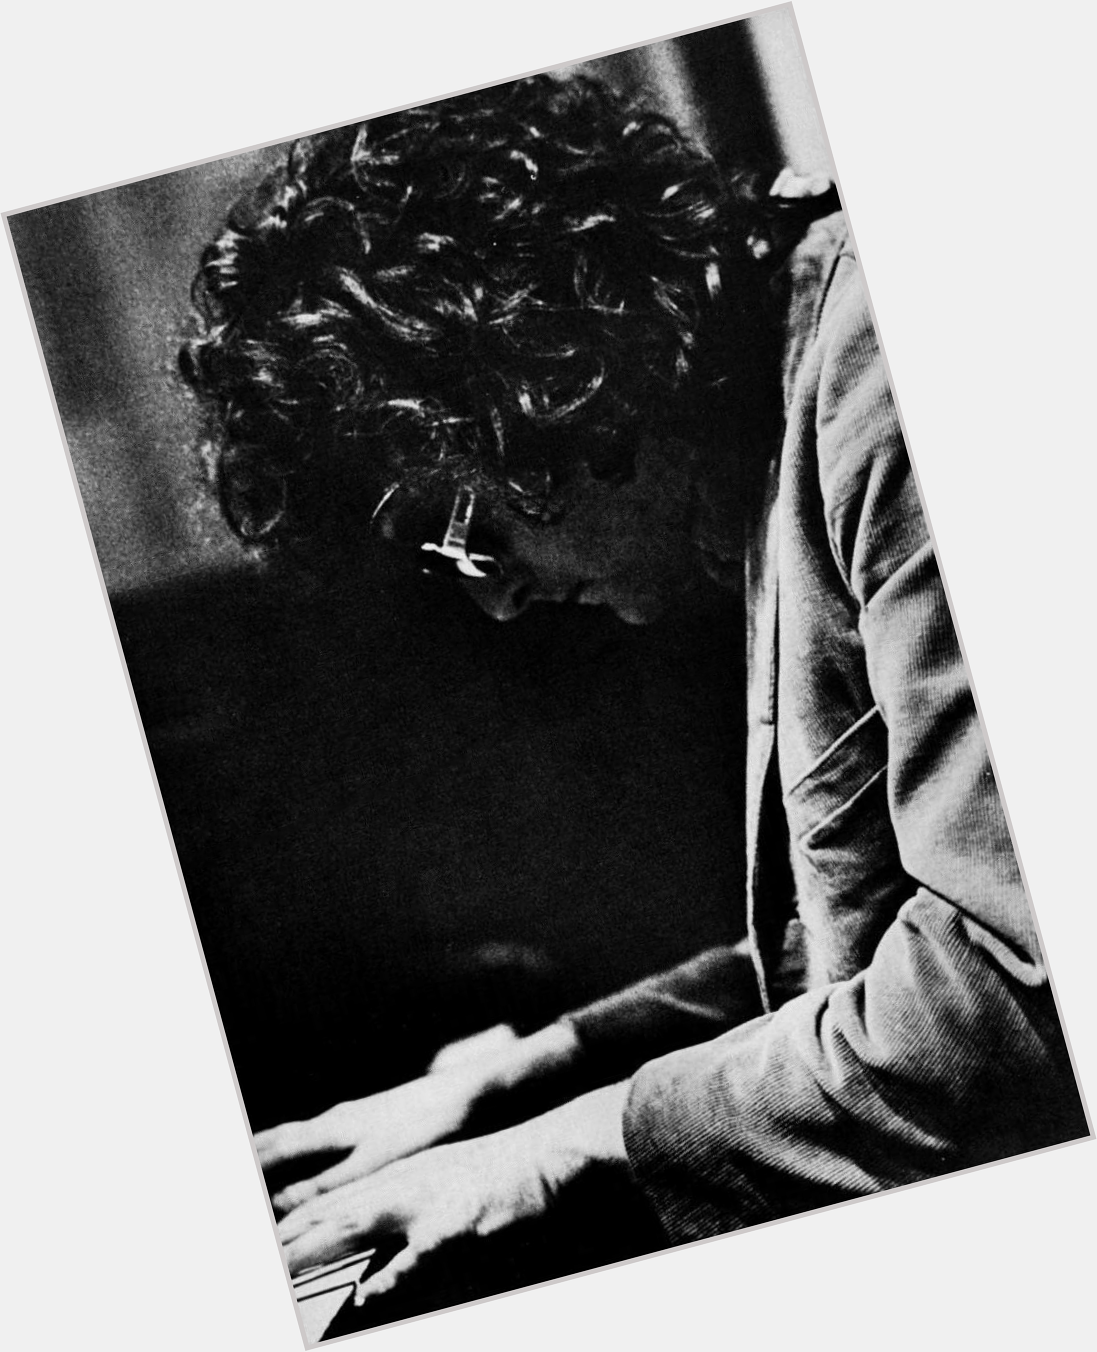 Randy Newman was born on this date November 28 in 1943. Happy Birthday, Randy Newman! 